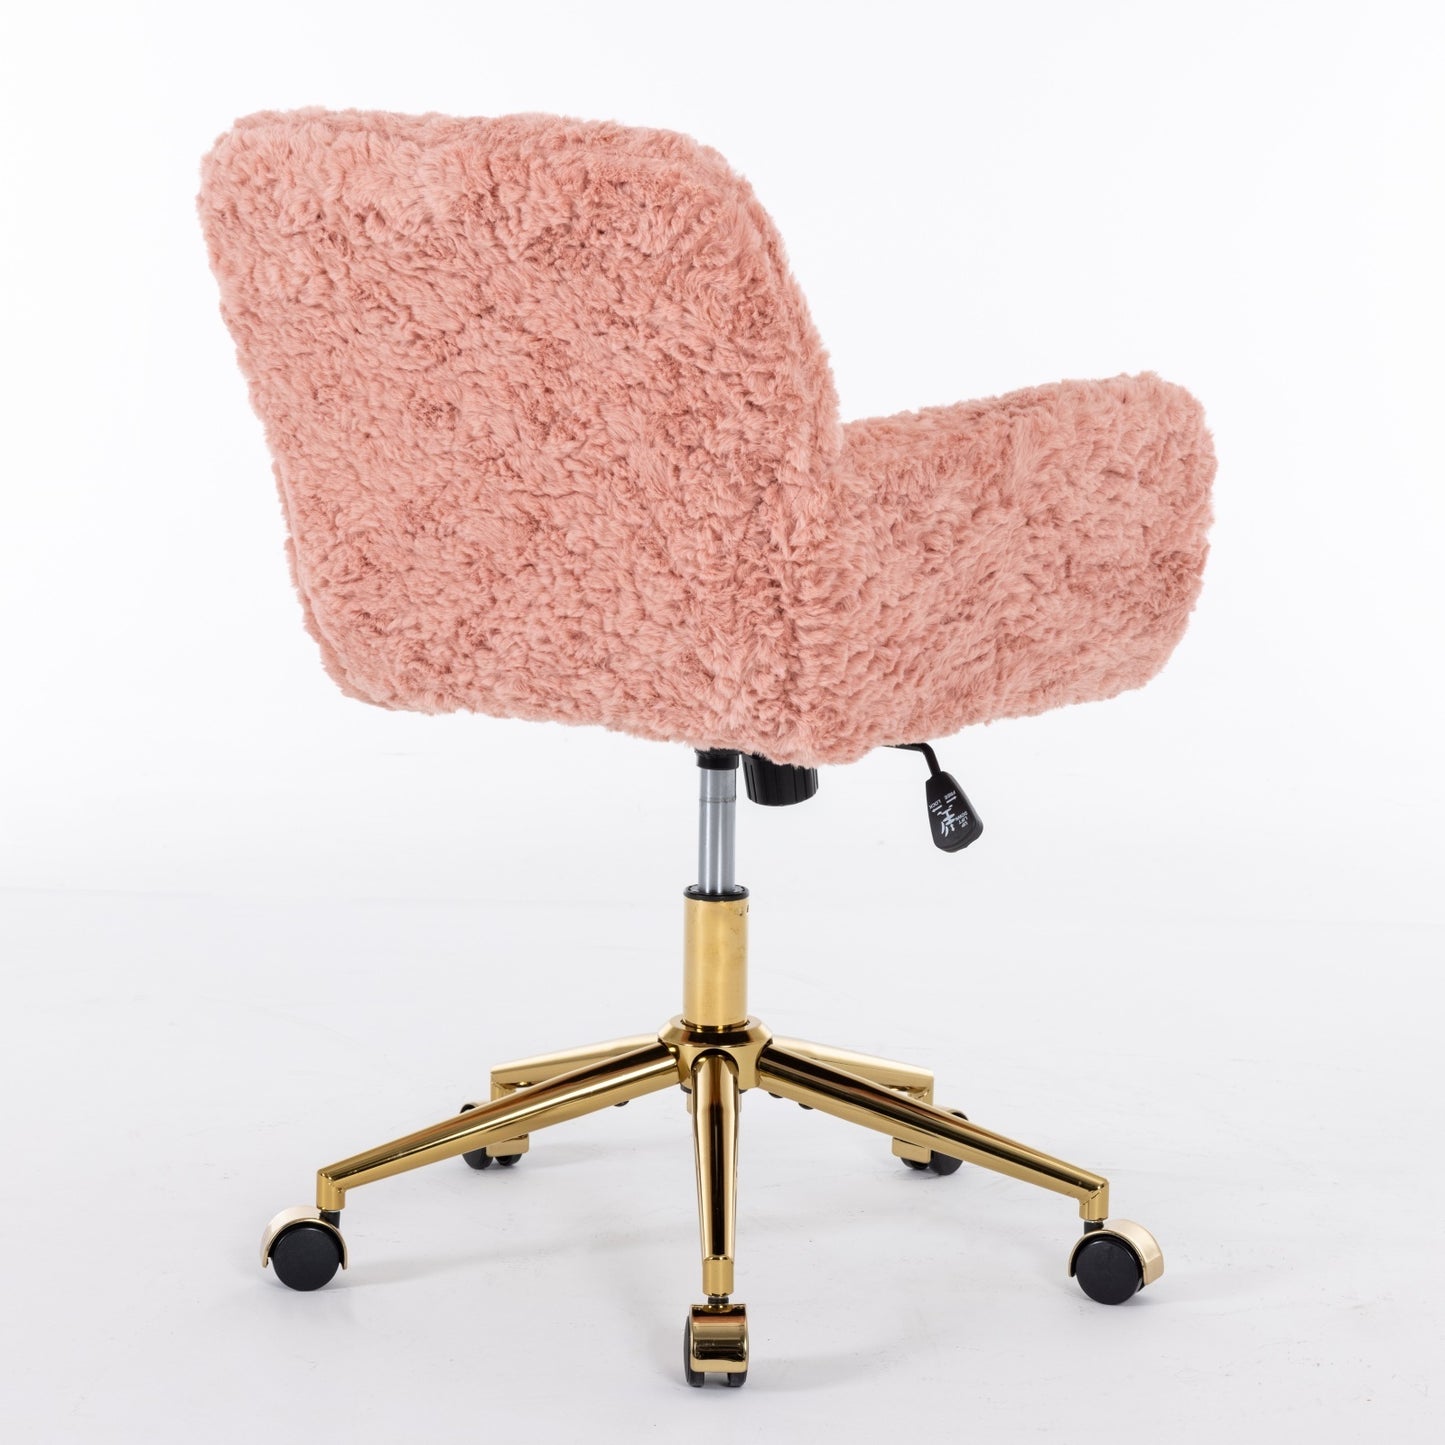 A&A Furniture Office Chair,Artificial rabbit hair Home Office Chair with Golden Metal Base,Adjustable Desk Chair Swivel Office Chair,Vanity Chair(Pink)